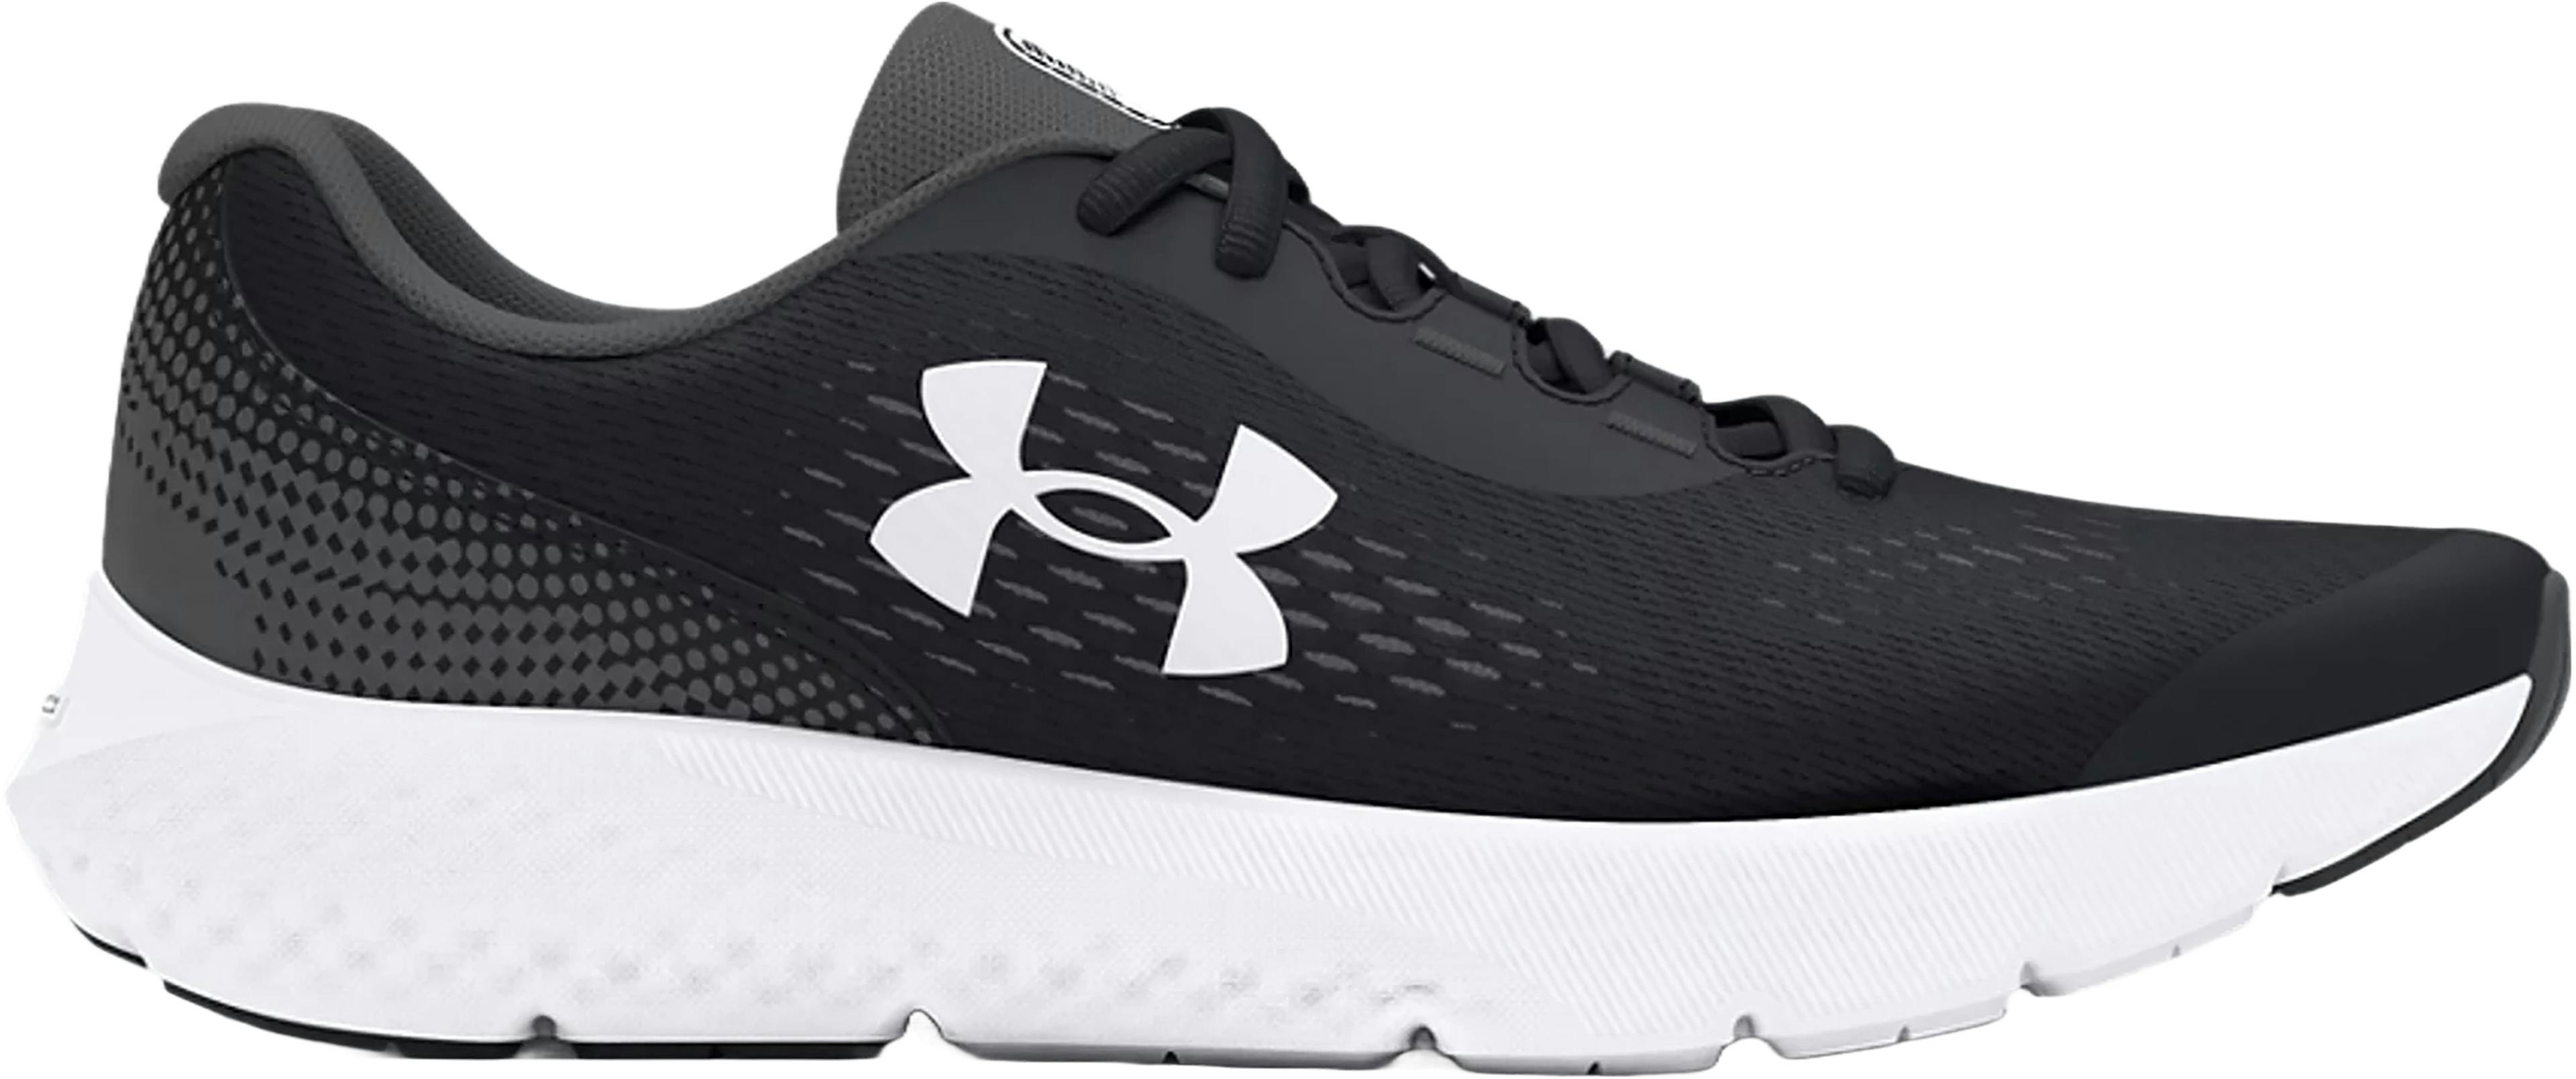 Product image for Grade School UA Rogue 4 Running Shoes - Big Boys